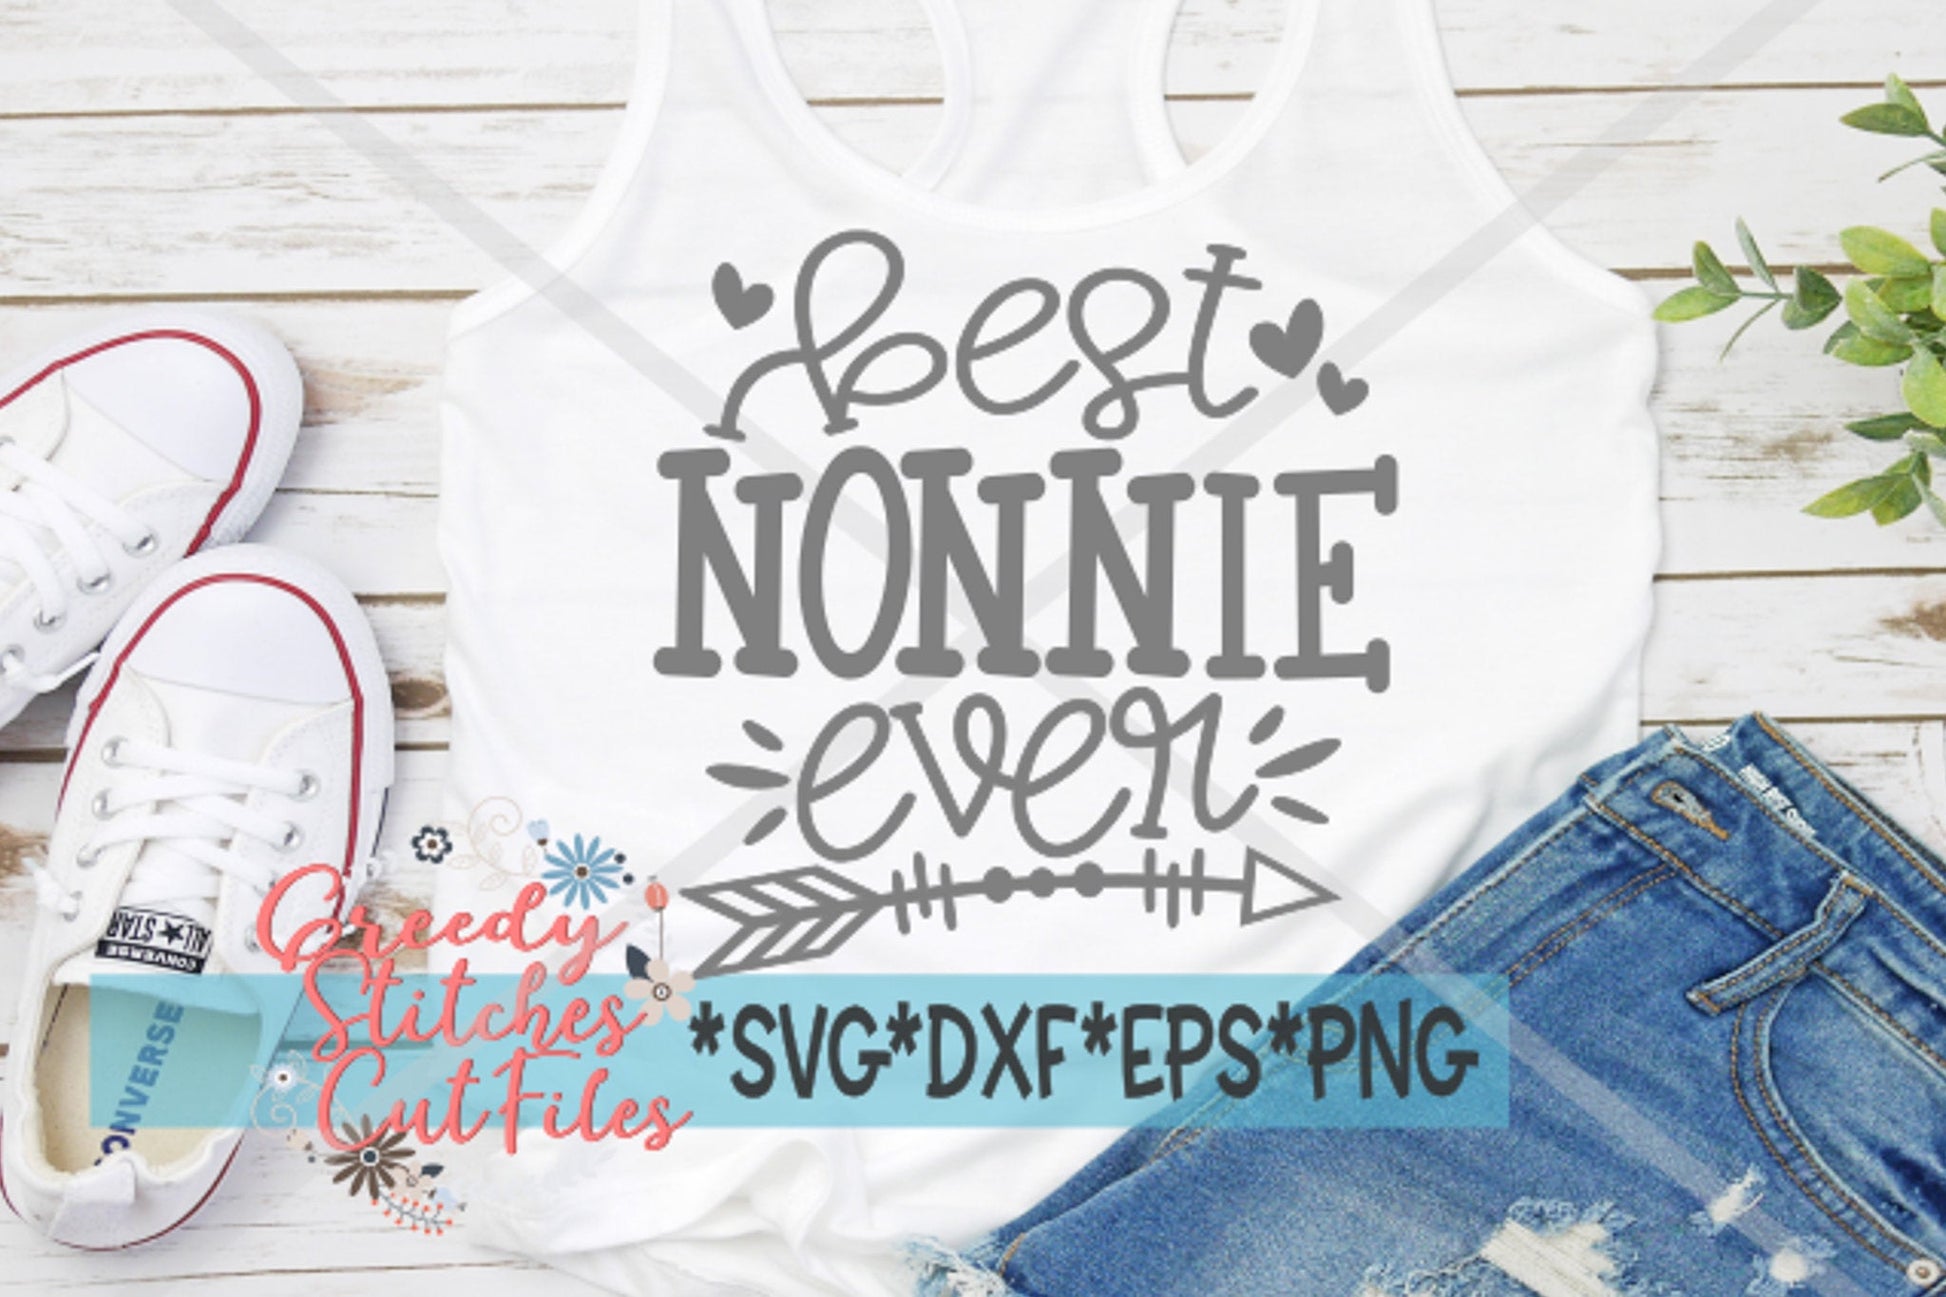 Best Nonnie Ever SvG | Mother&#39;s Day SVG | Mother&#39;s Day | Nonnie SvG | Nonnie | Best Nonnie Ever svg, dxf, eps, png Instant Download Cut File